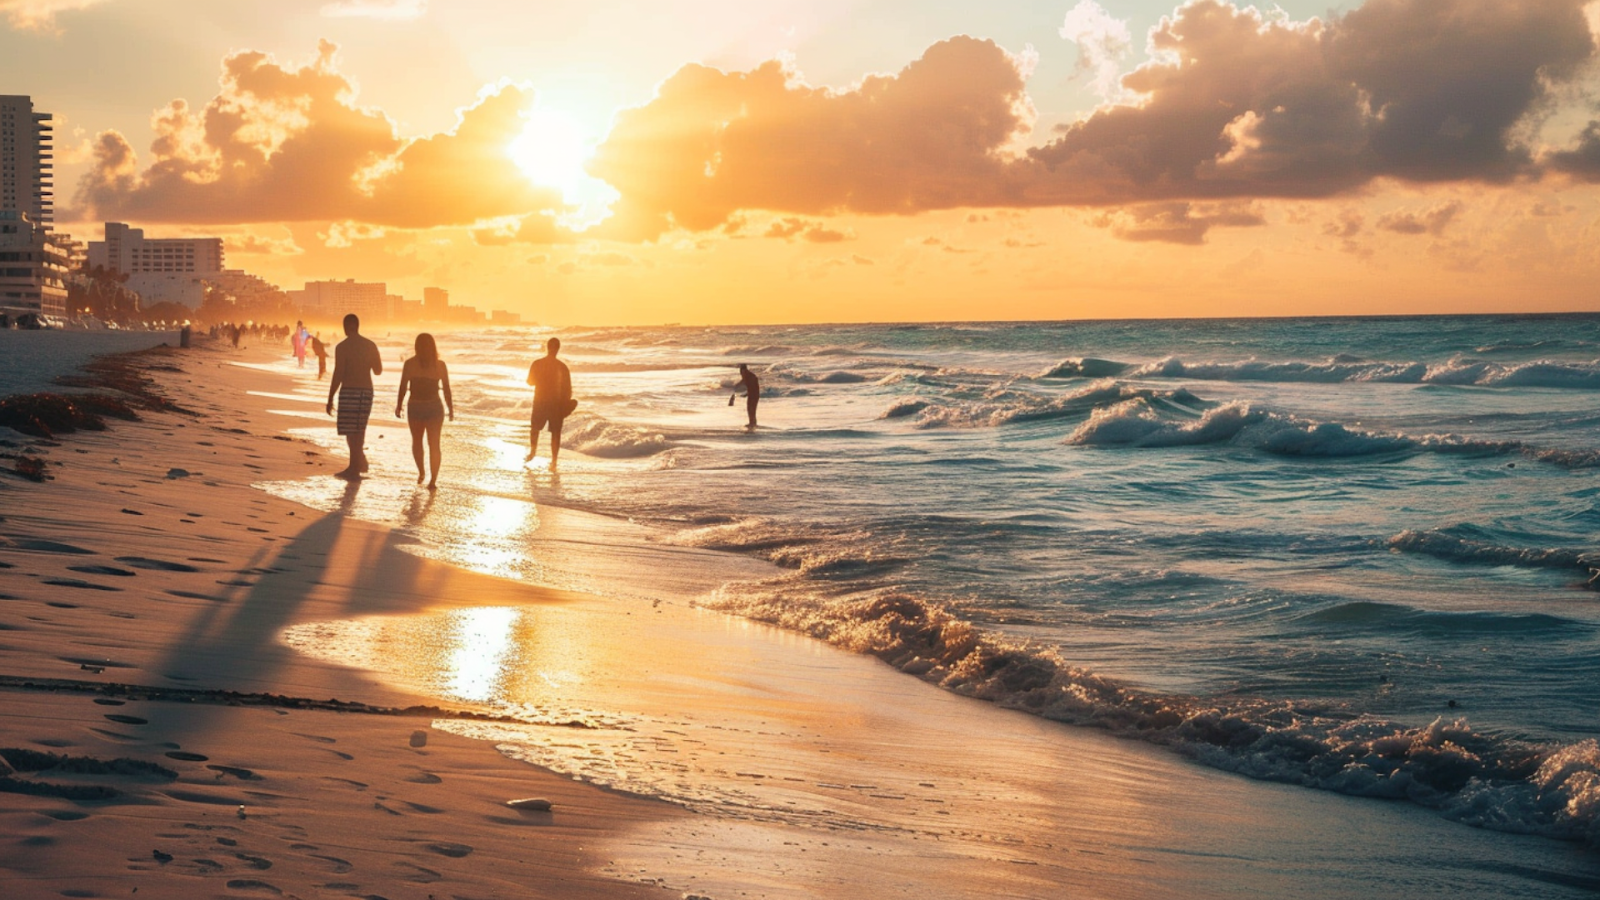 People walking along the shore during sunset in Cancun